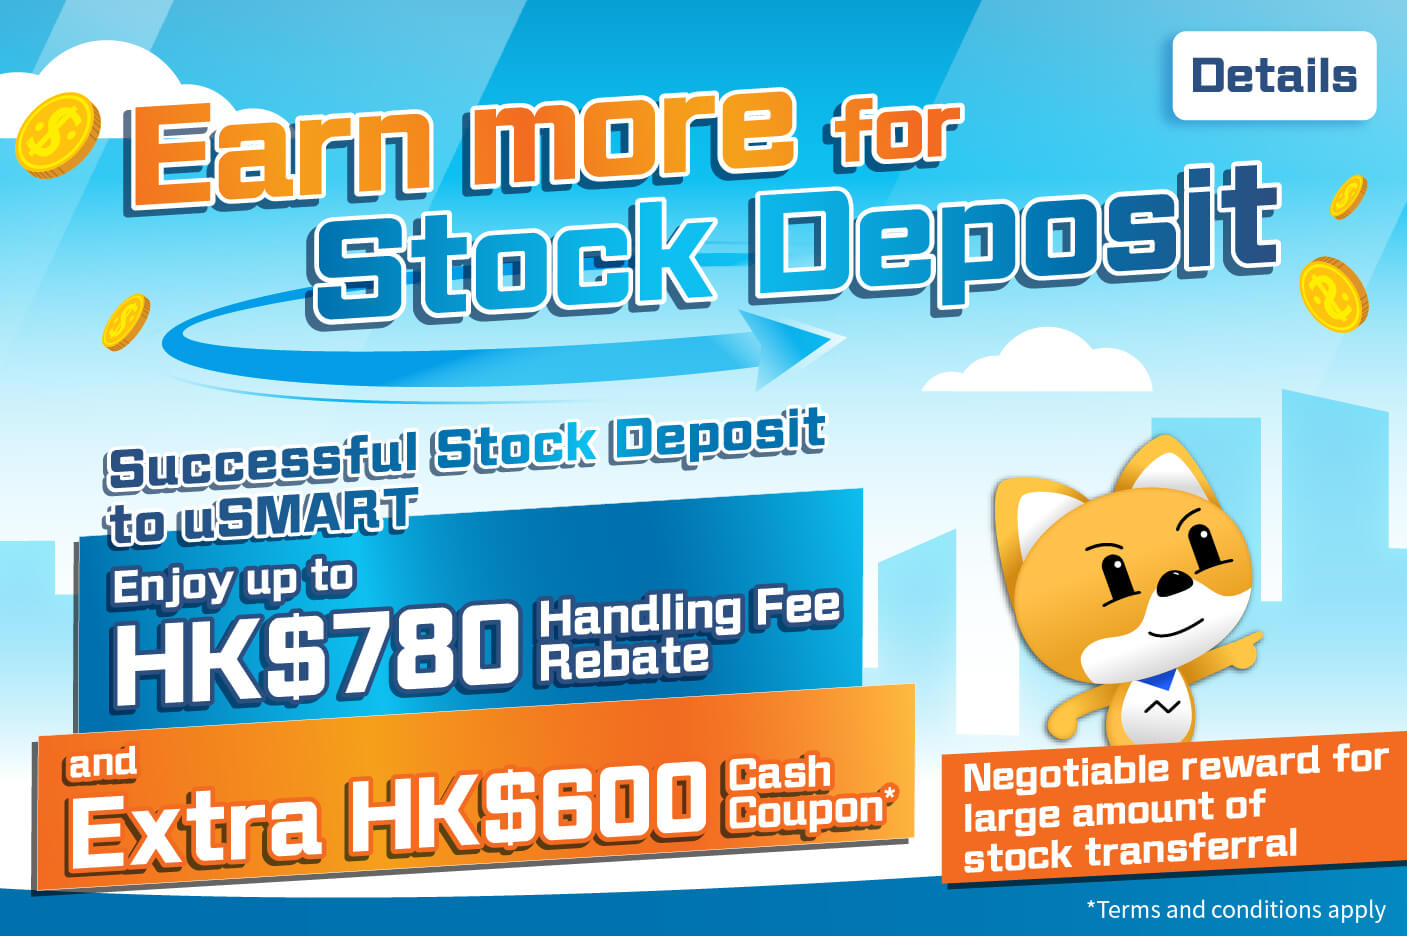 Earn more for stock deposit Enjoy up to HK$780 handling fee rebate and extra HK$600 cash coupon